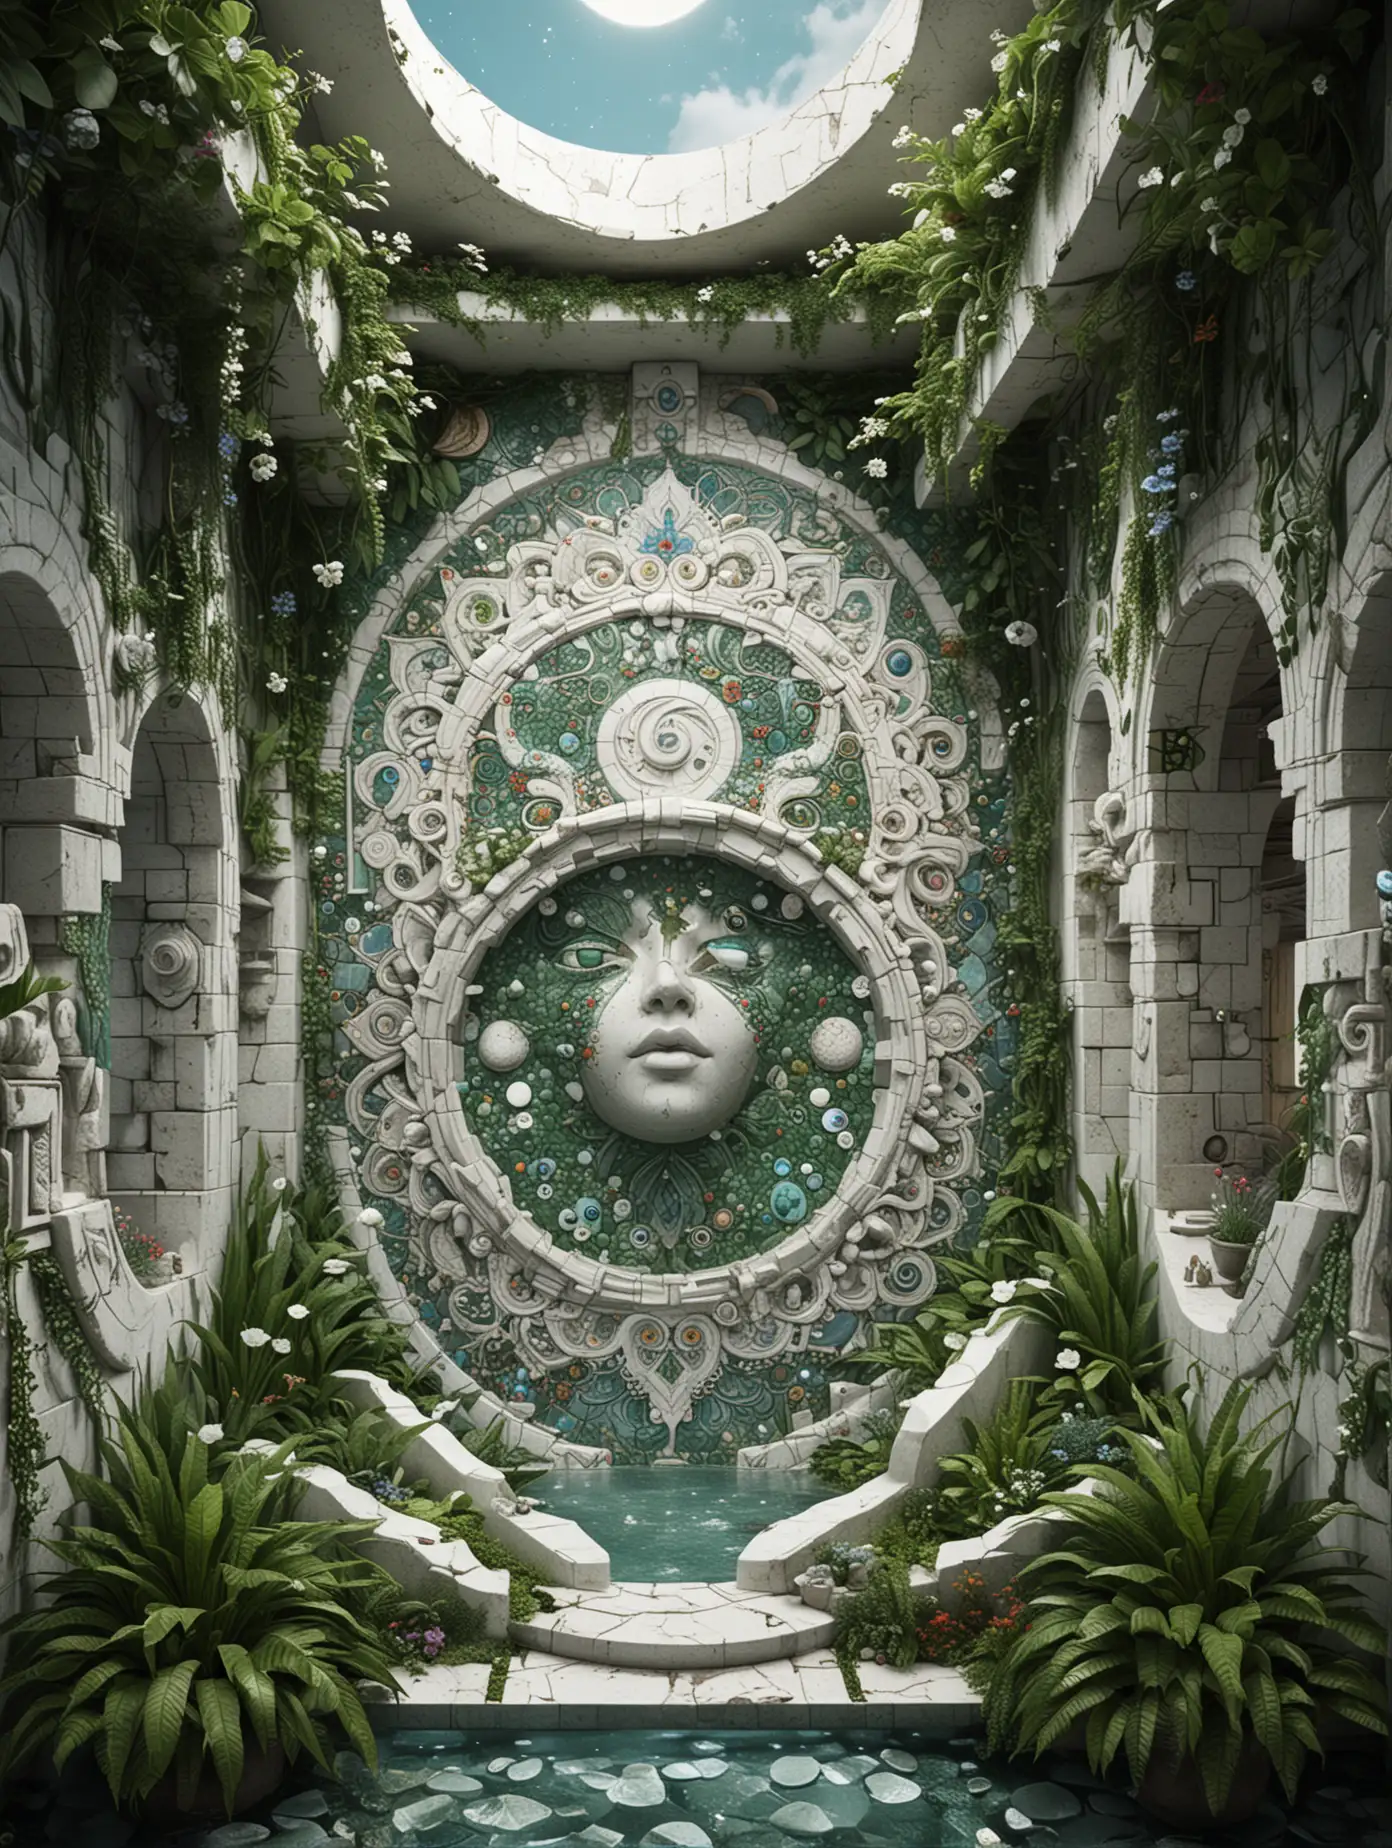 | A very detailed white stone spa and pool  : 1.
| a mosaic floor with colorful fractal patterns : 1.
| green alien plants and colorful flowers : 1
| carved walls adorned with colorful alchemical symbols : 1.
| amphoras with detailed colorful magical symbols : 1.
| very detailed moon goddess face sculpture : .9
| clear,dark nordic atmosphere : 1.
| highly detailed,high precision,focus on textures, hyperrealistic,bright : 1.